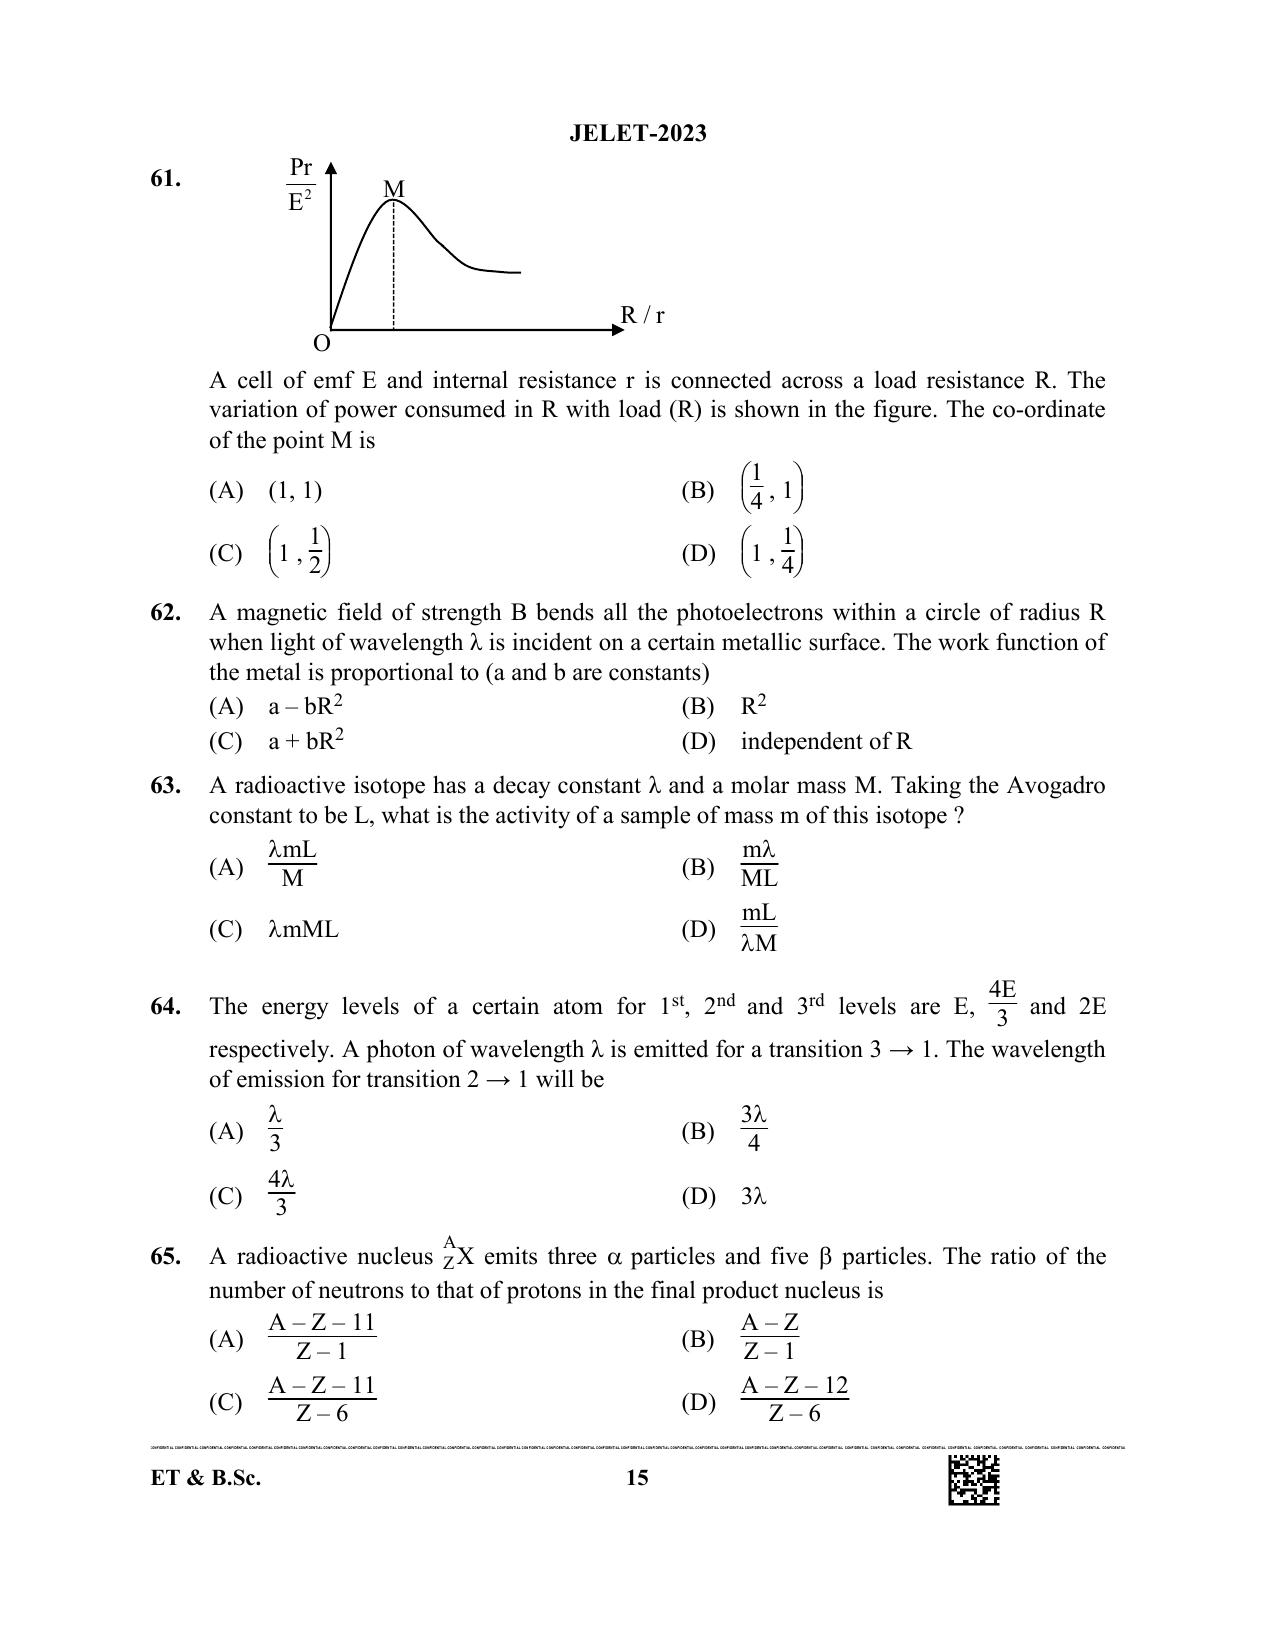 WBJEE JELET 2023 Paper I (ET & BSC) Question Papers - Page 15